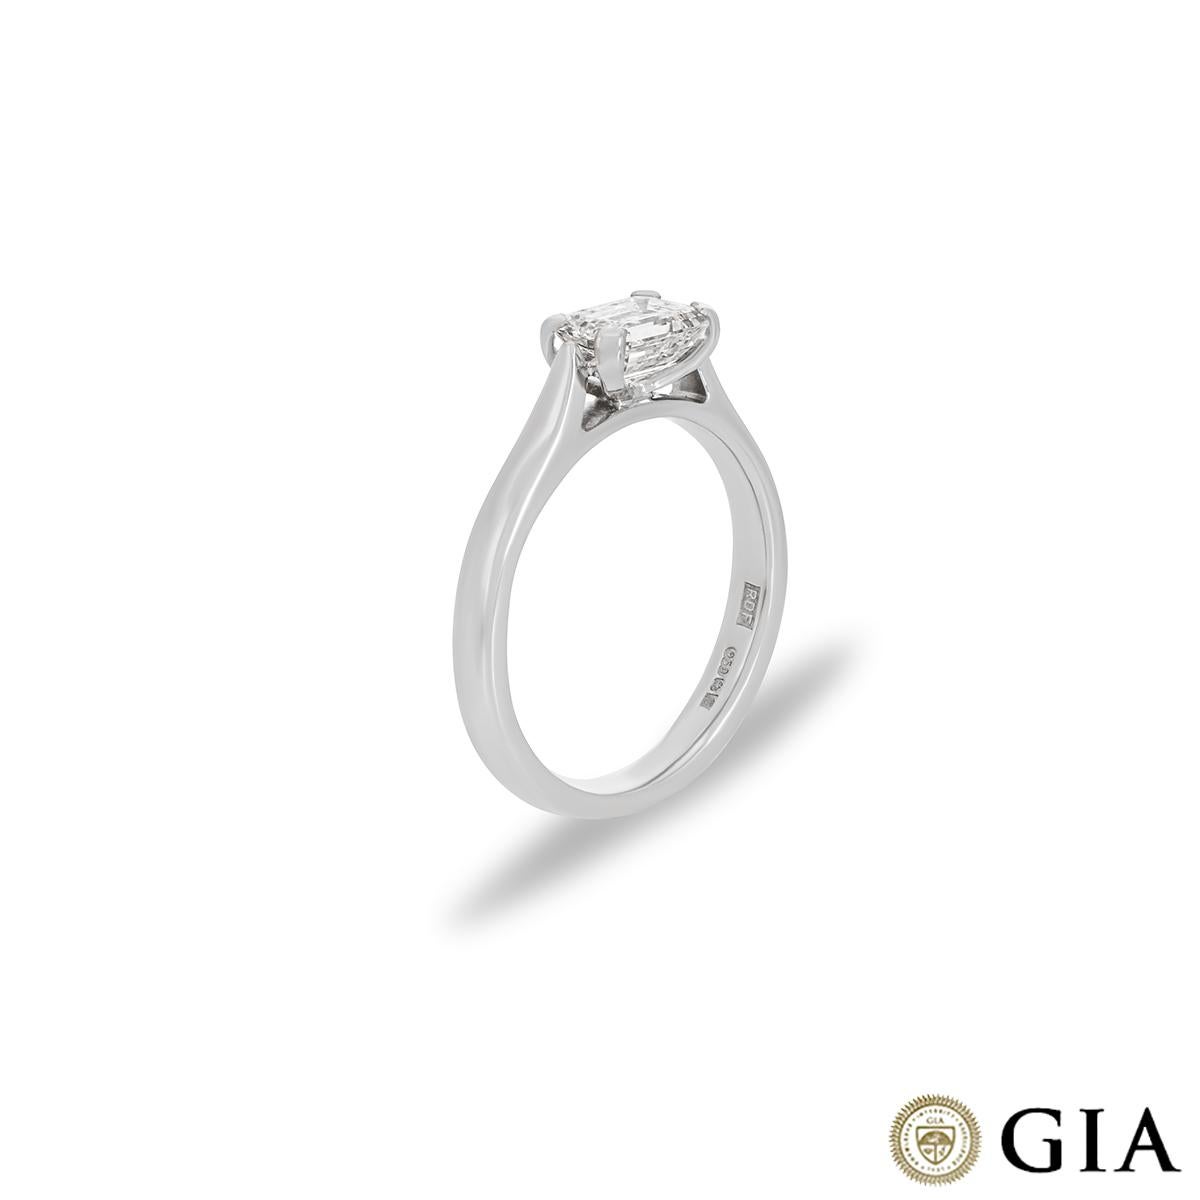 A modern platinum diamond solitaire ring. The ring showcases an emerald cut diamond set in an East-West mount weighing 0.73ct, E colour and VVS2 clarity. The solitaire measures 2.4mm in width, has a gross weight of 2.36 grams and is currently a UK